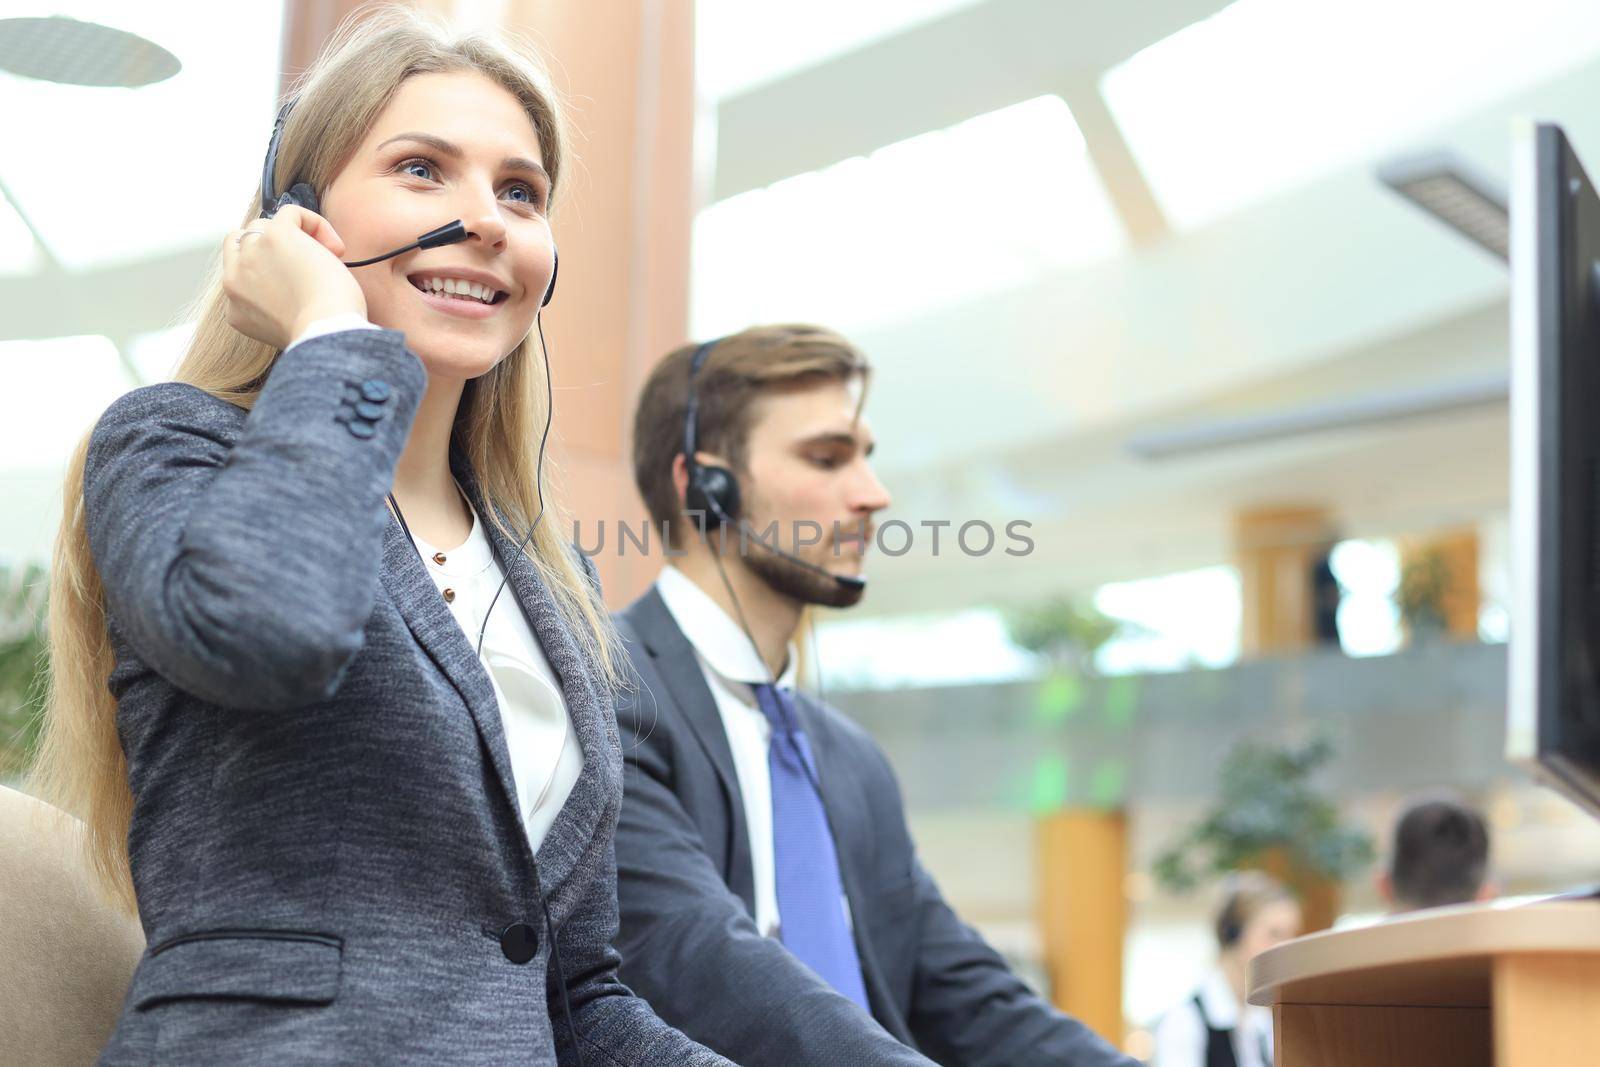 Female customer support operator with headset and smiling